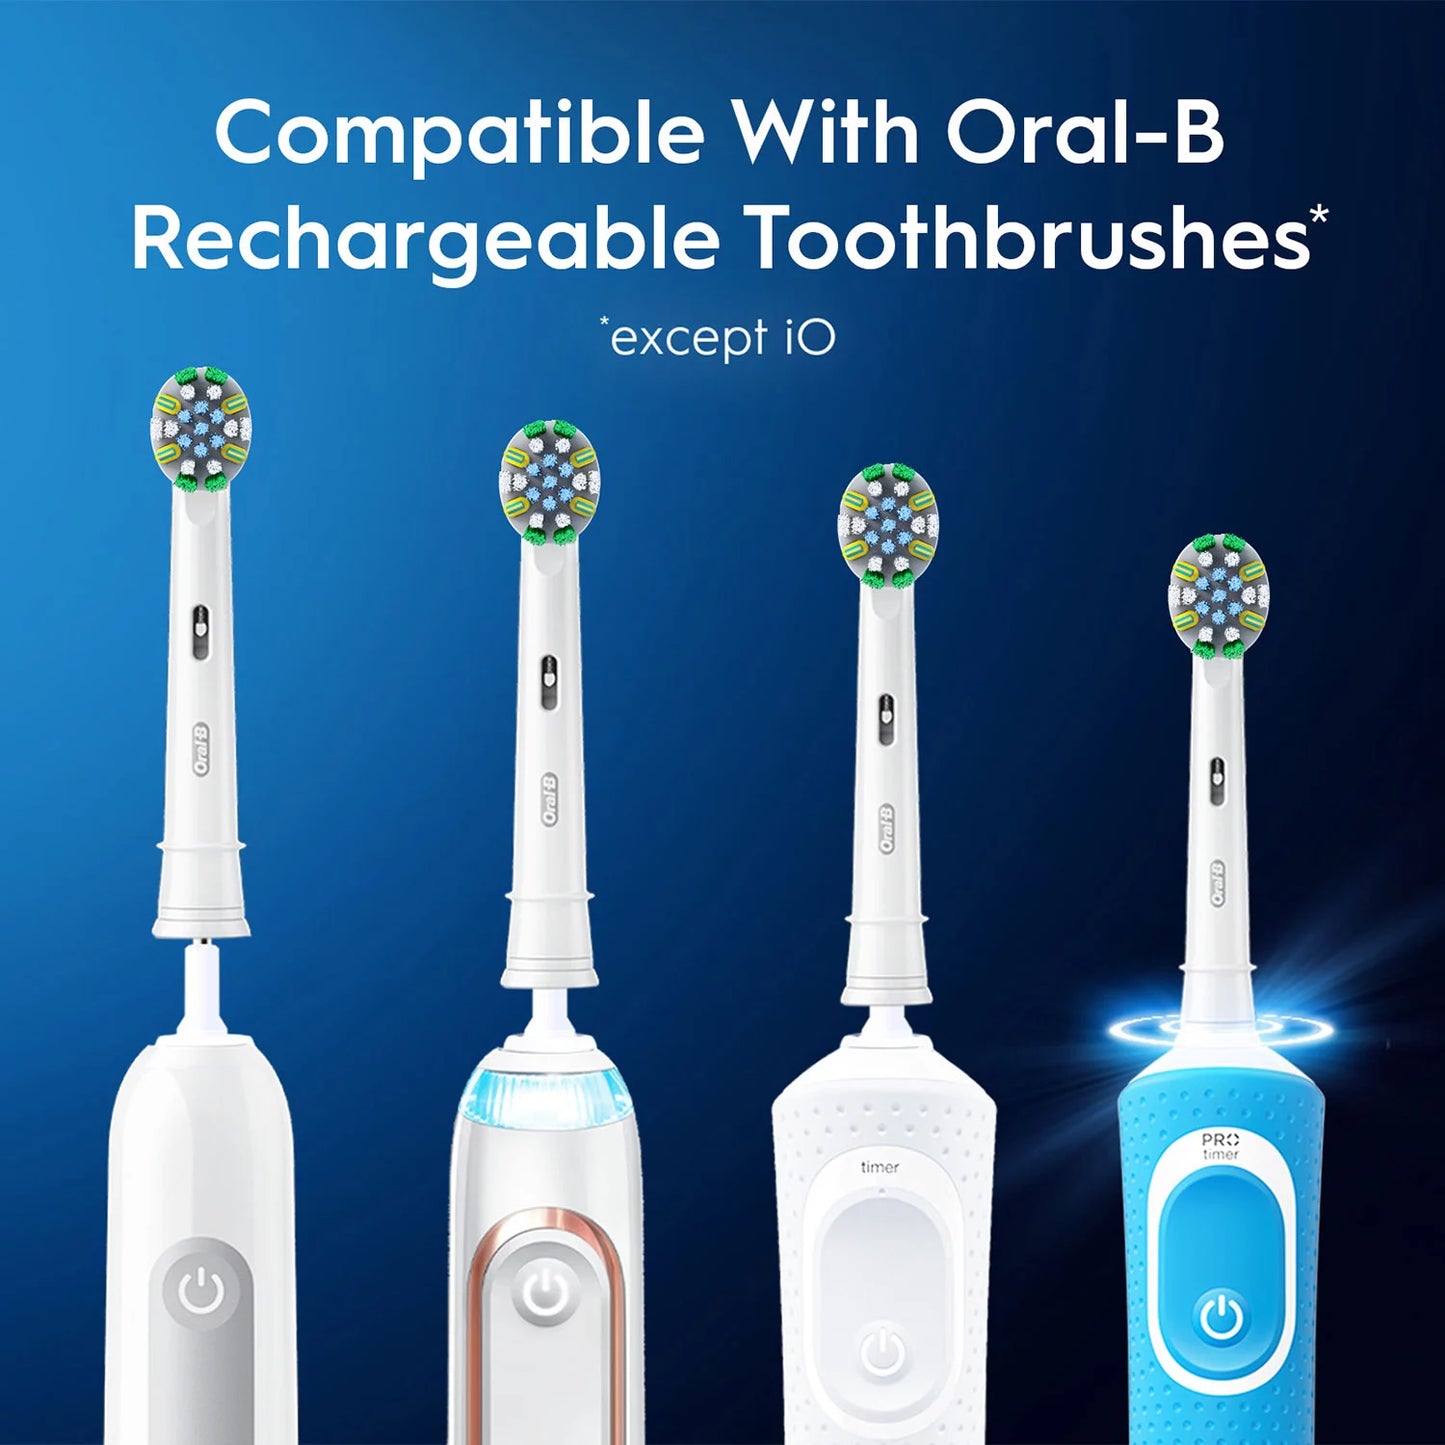 Oral-B FlossAction Electric Toothbrush Replacement Brush Heads (10 ct.)